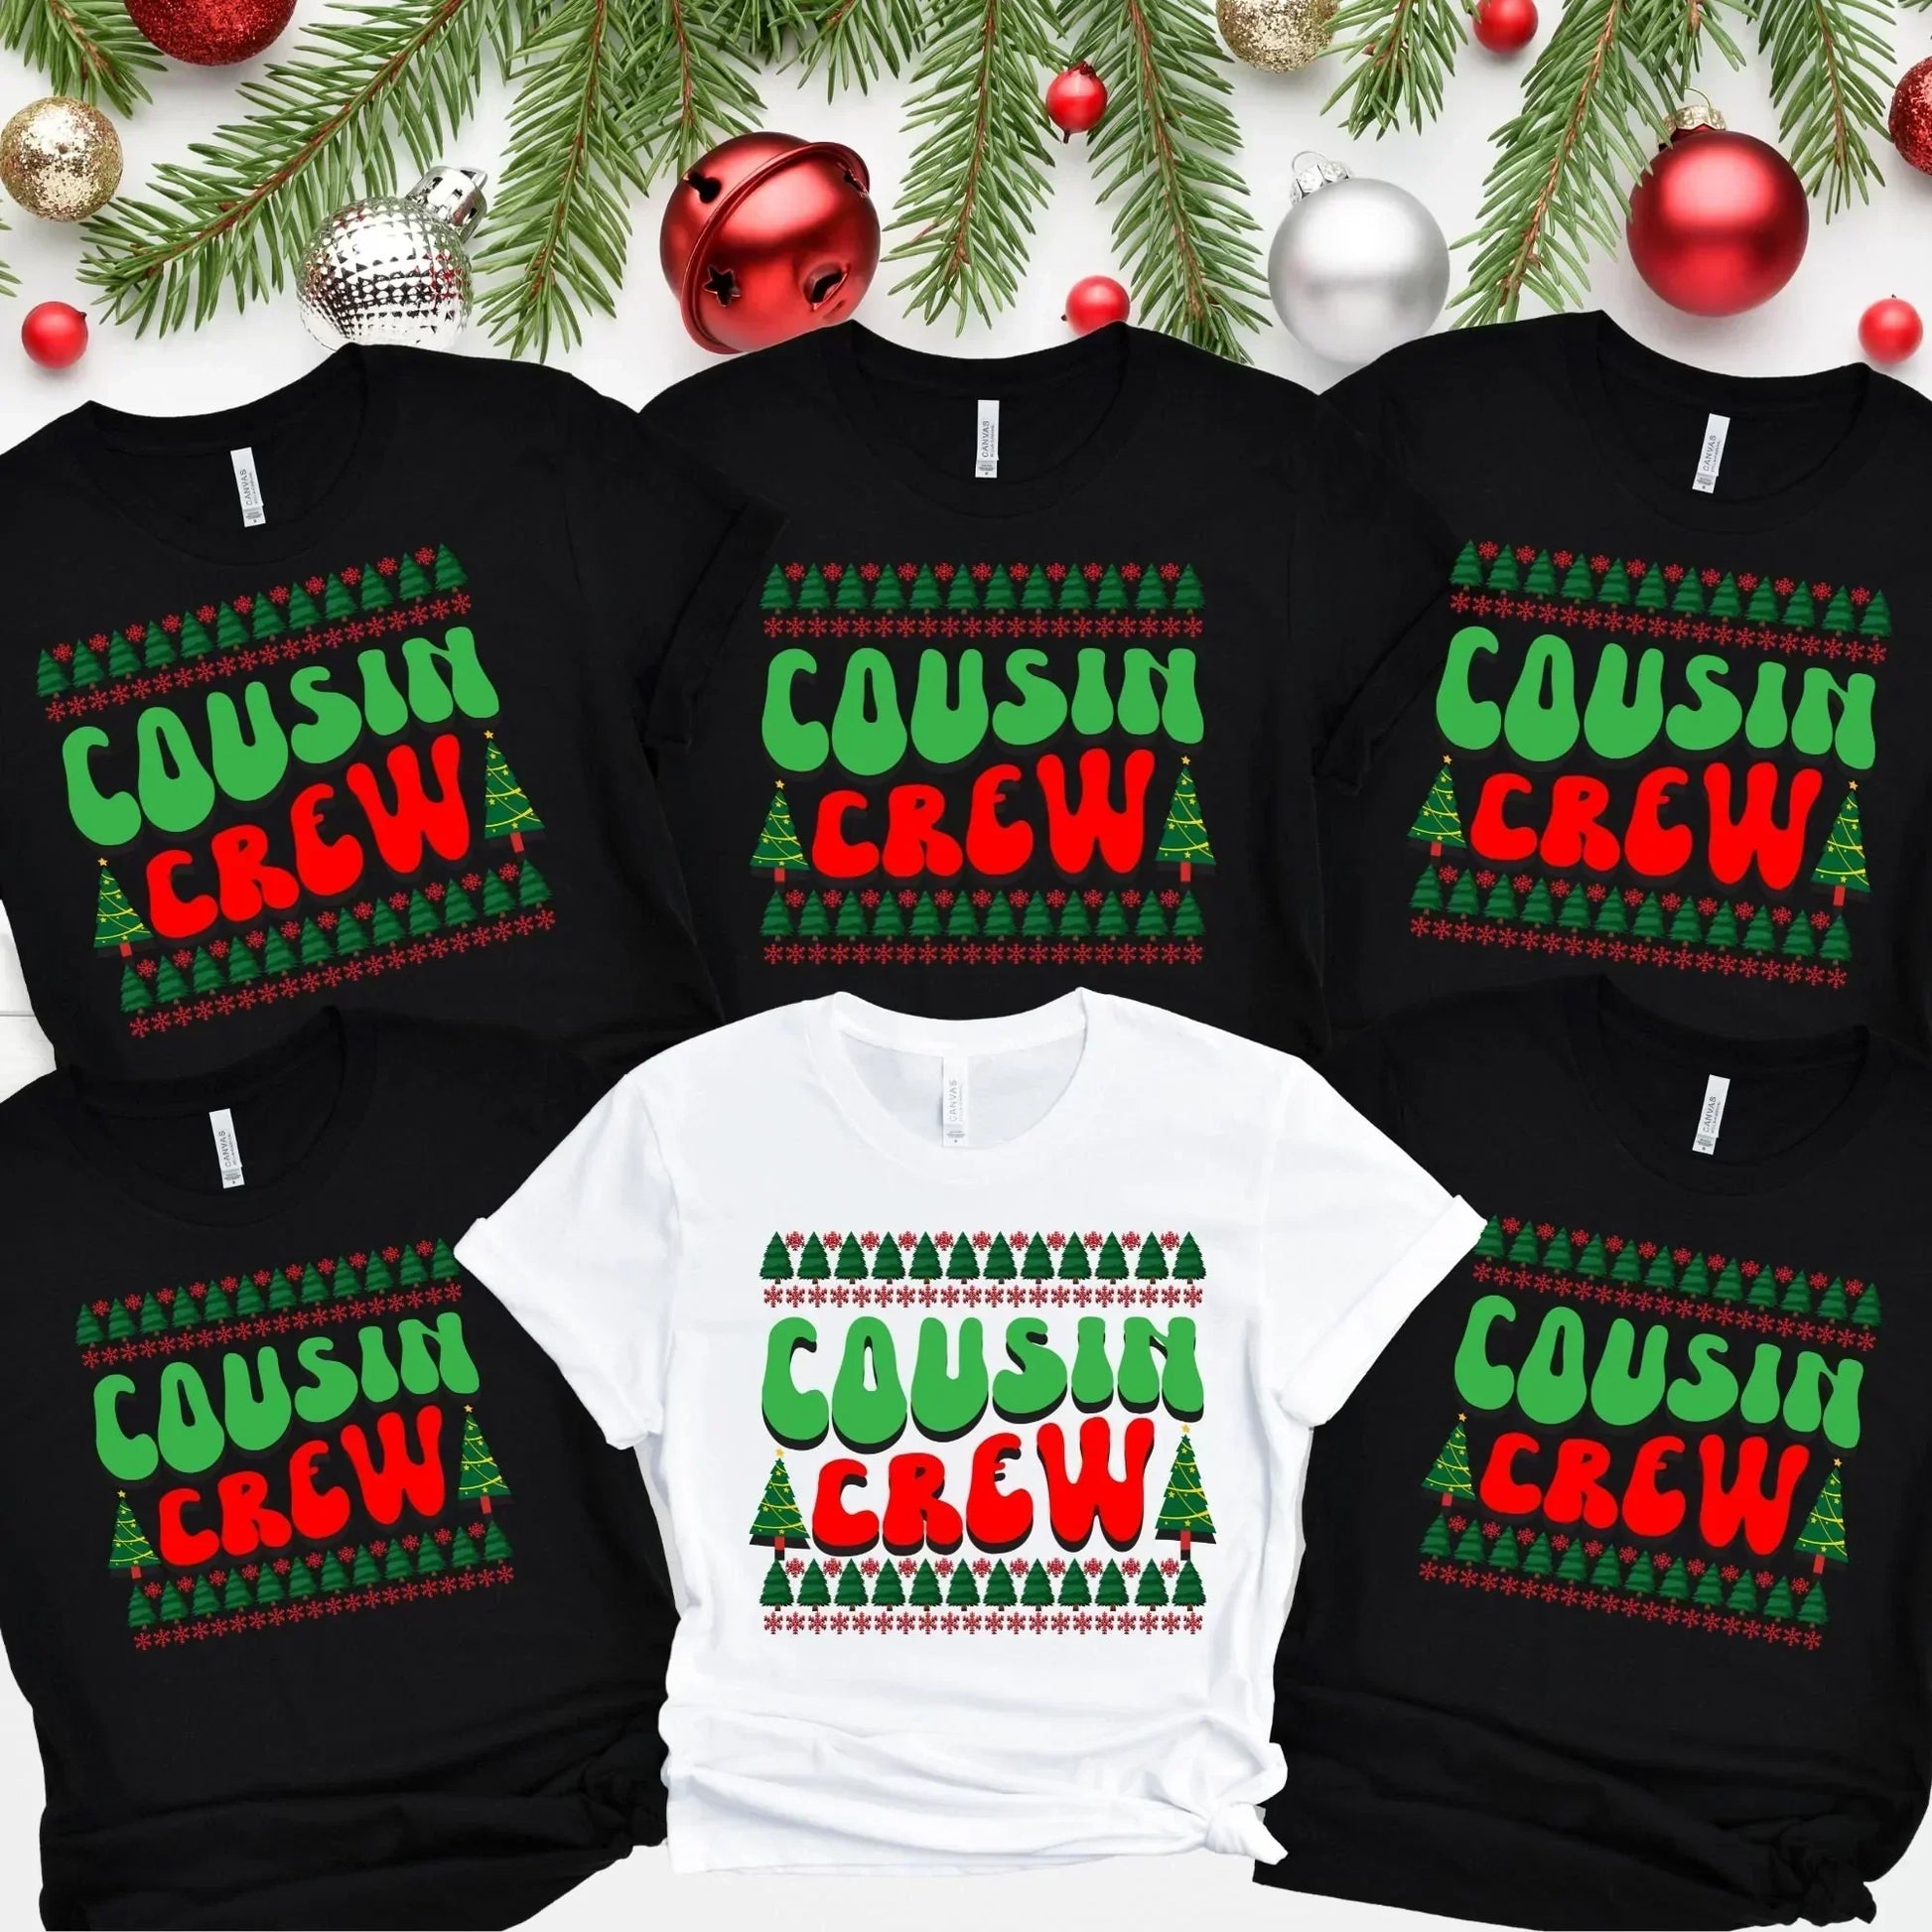 Cousin Crew Christmas Family Shirts, Retro Matching Group T-shirts, Cousin Squad Xmas Sweaters, Matching Family Holiday Photos, Cousin Gifts HMDesignStudioUS